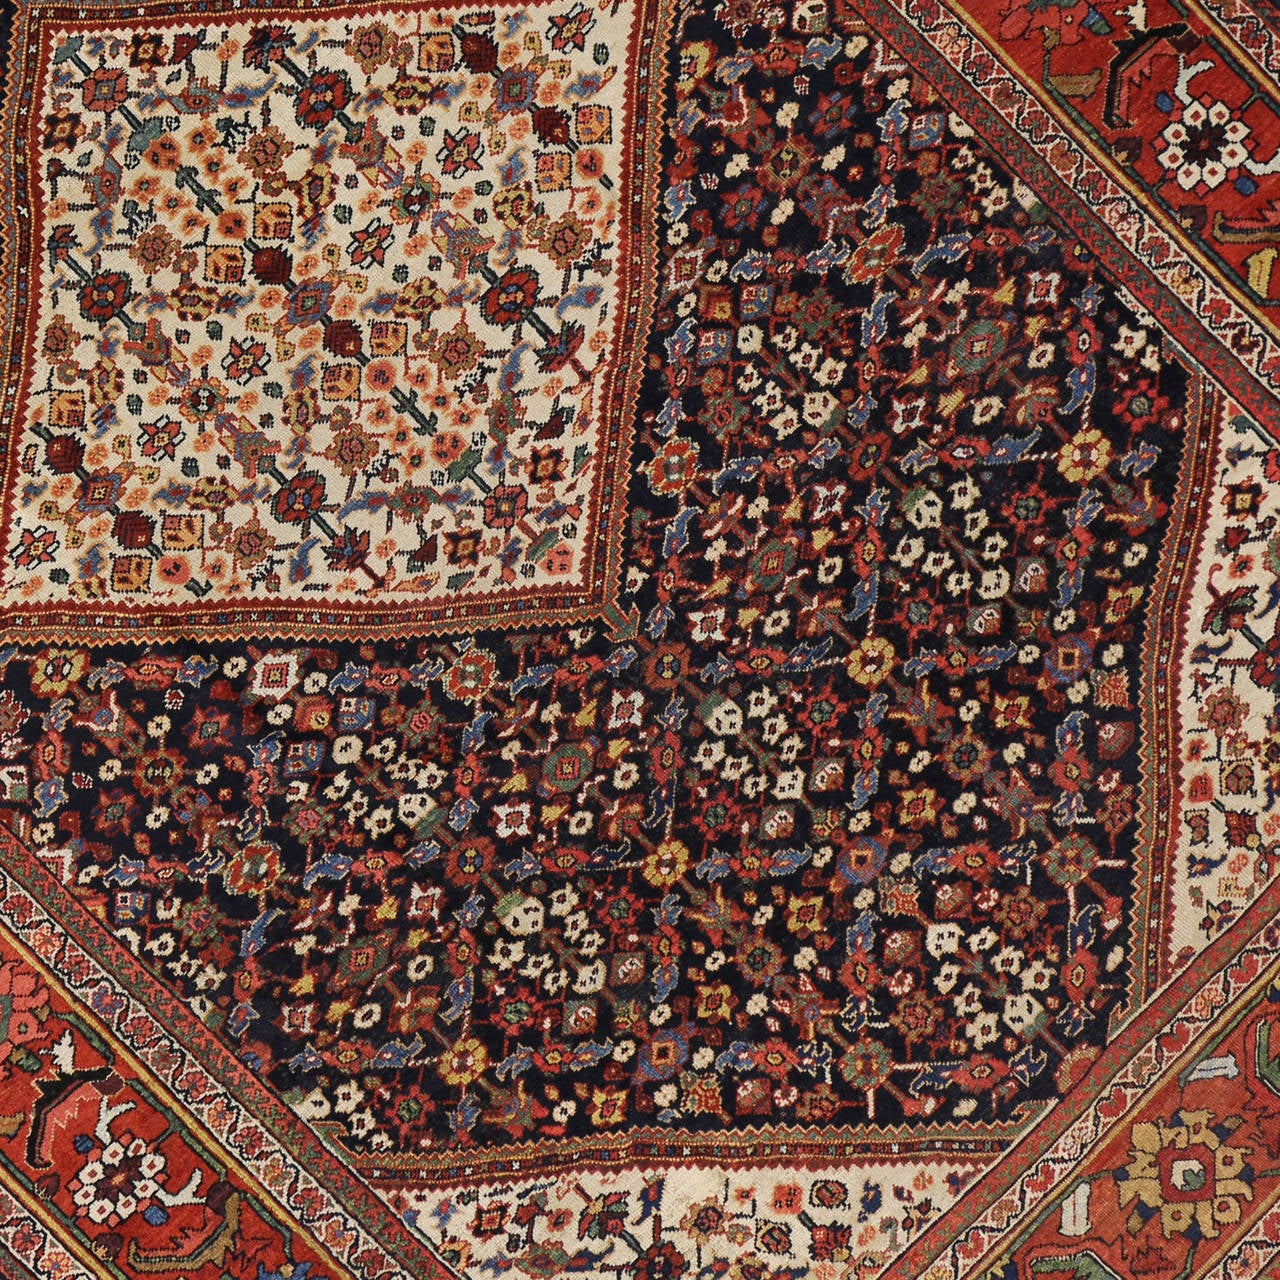 Modern Antique Persian Mahal Area Rug with Transitional Style 1